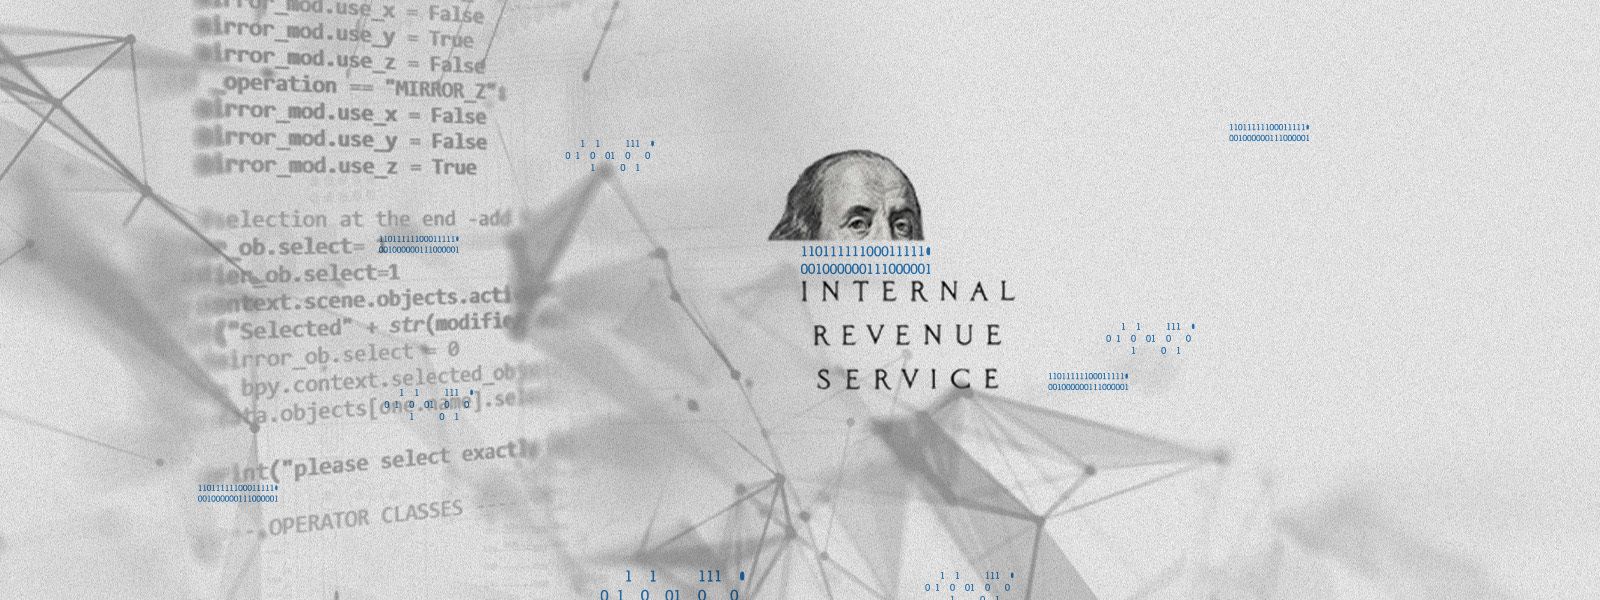 IRS Cyberattack Highlights Risk of Tax Refund Fraud